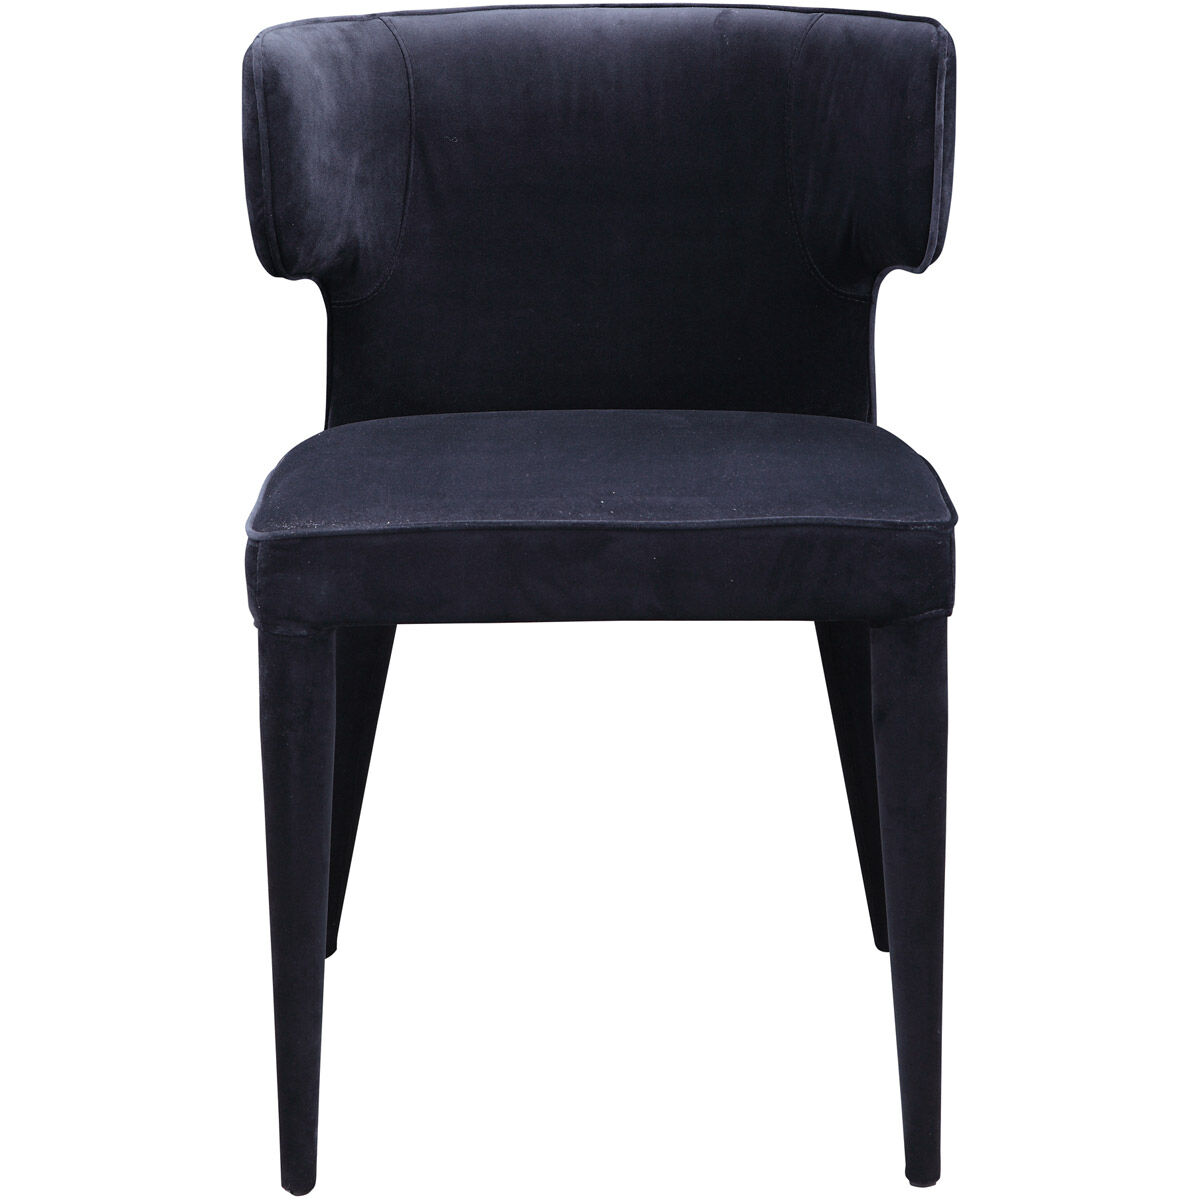 Moe's Home Collection EH-1103-02 Jennaya Black Dining Chair